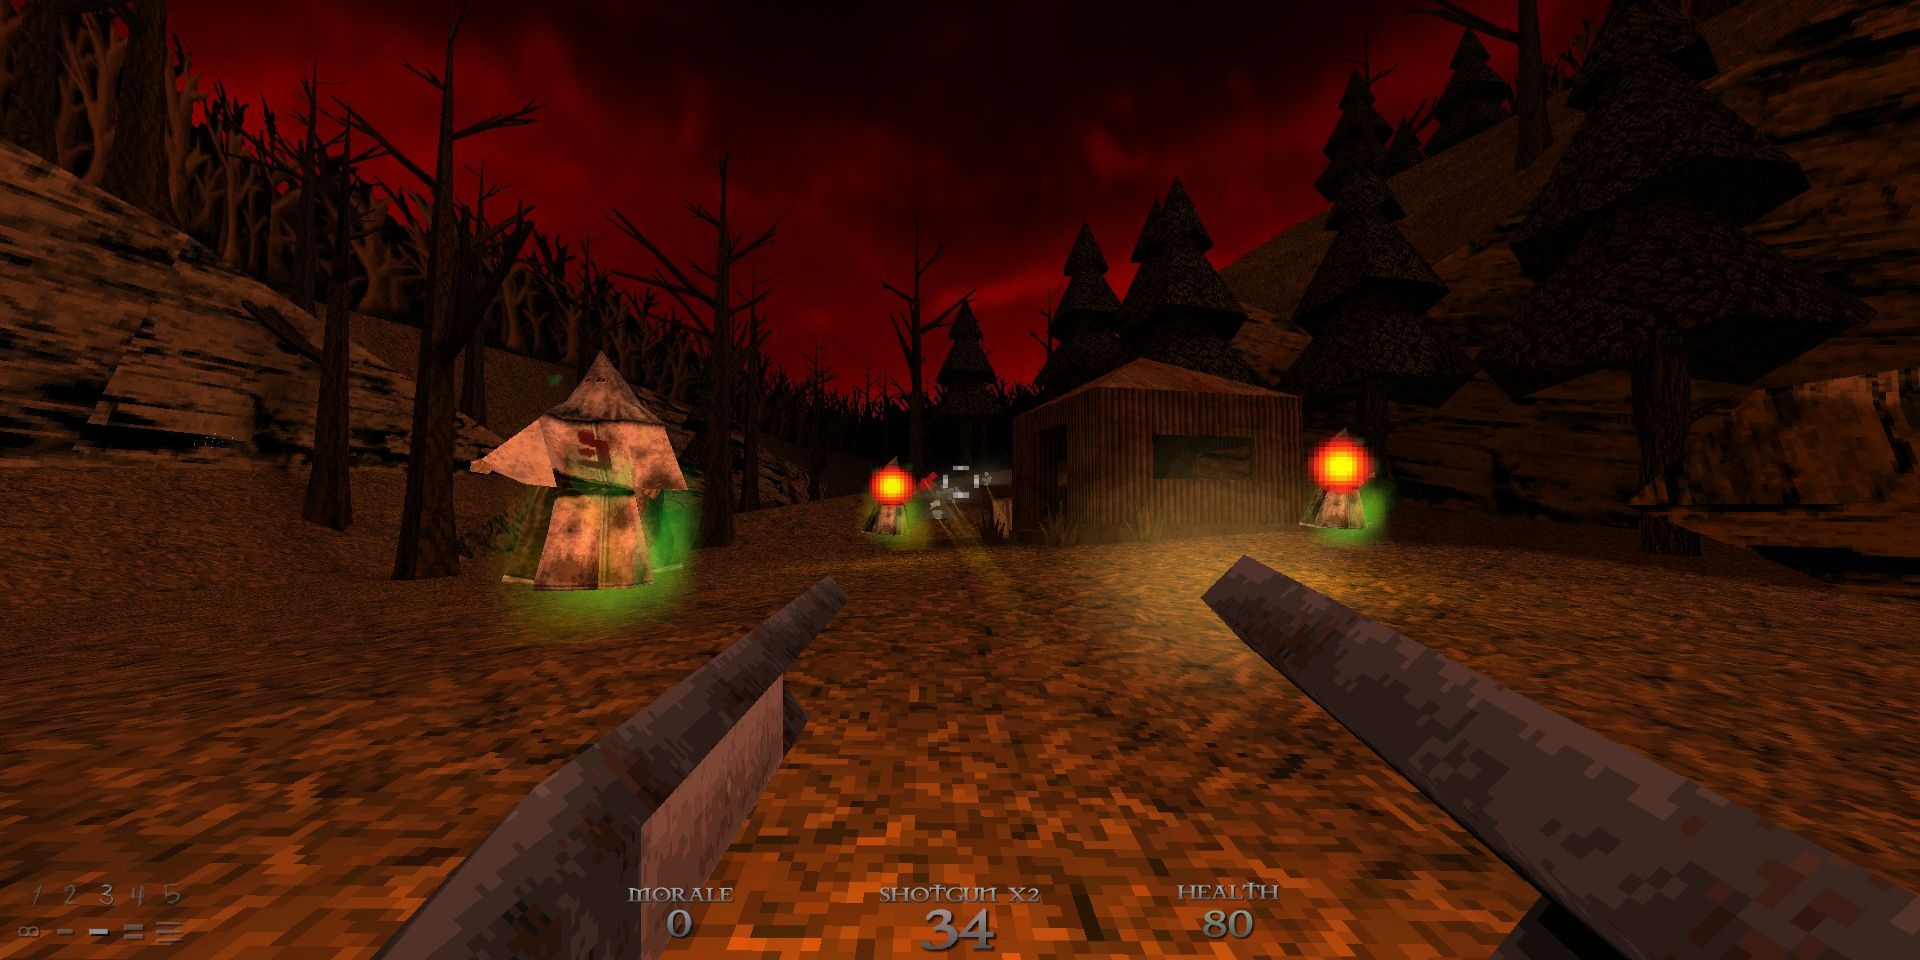 A screenshot of the 2018 retro-inspired FPS video game Dusk.